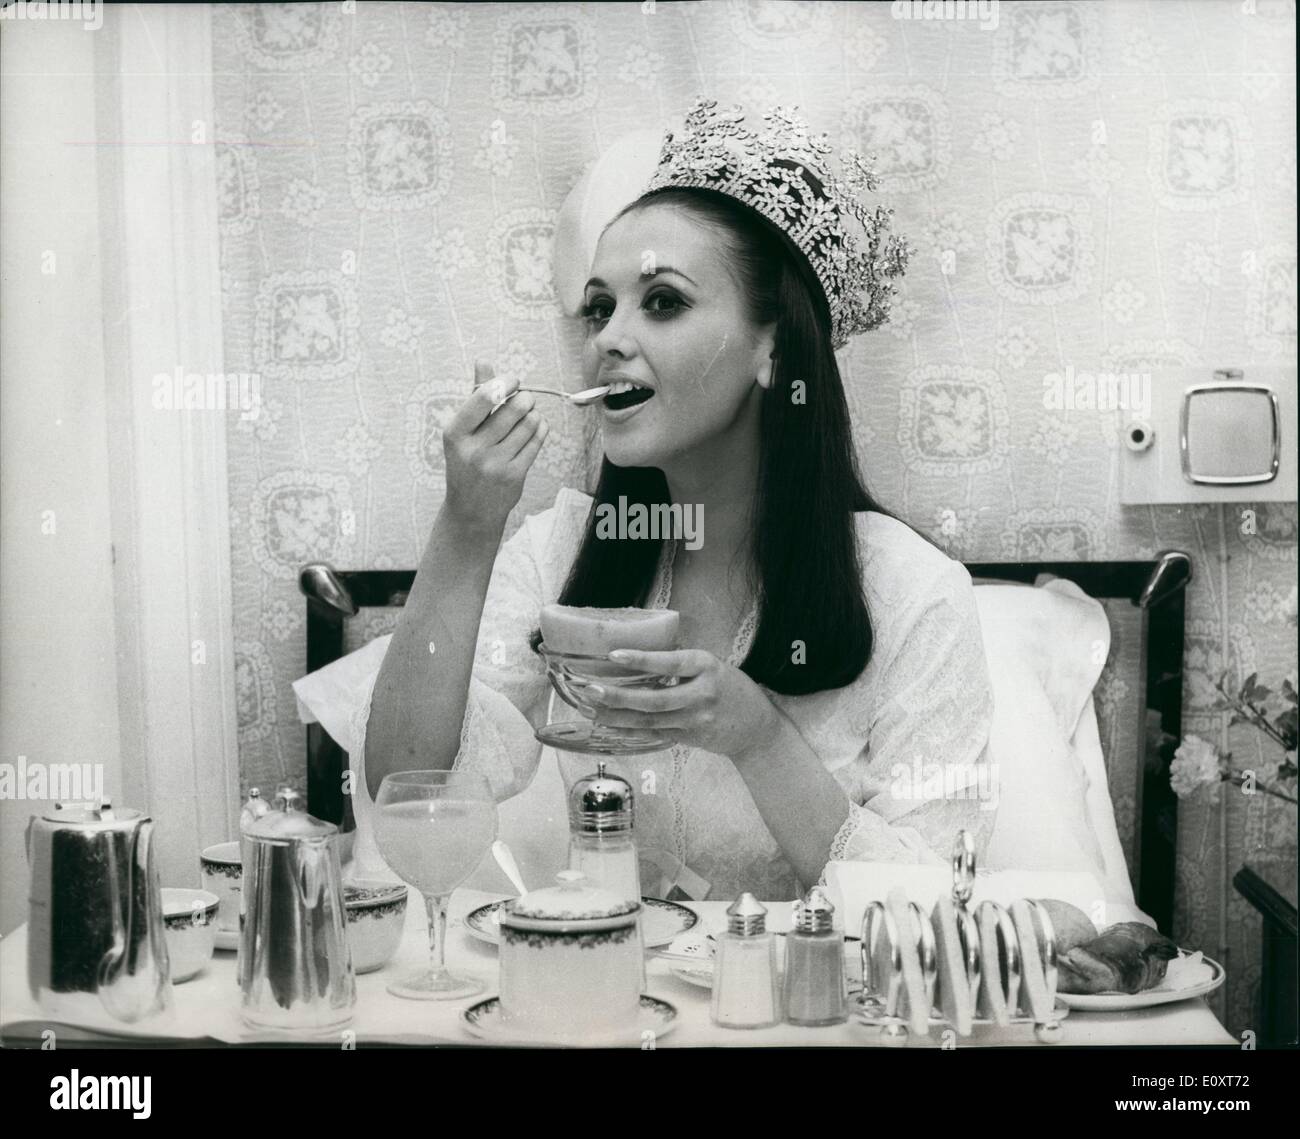 Nov. 11, 1967 - Breakfast in bed for the new ''Miss World'': Miss Peru, 21-year-old Madeline Hartog-Bel, who last night became ''Miss World'' was served with breakfast in bed as she awoke to her new wonderful world at the Waldorf Hotel this morning. Photo shows Miss Peru (Madeline Hartog-Bel) the new ''Miss World'' sits up in the bed with her breakfast on a tray at the Waldorf Hotel, London this morning Stock Photo